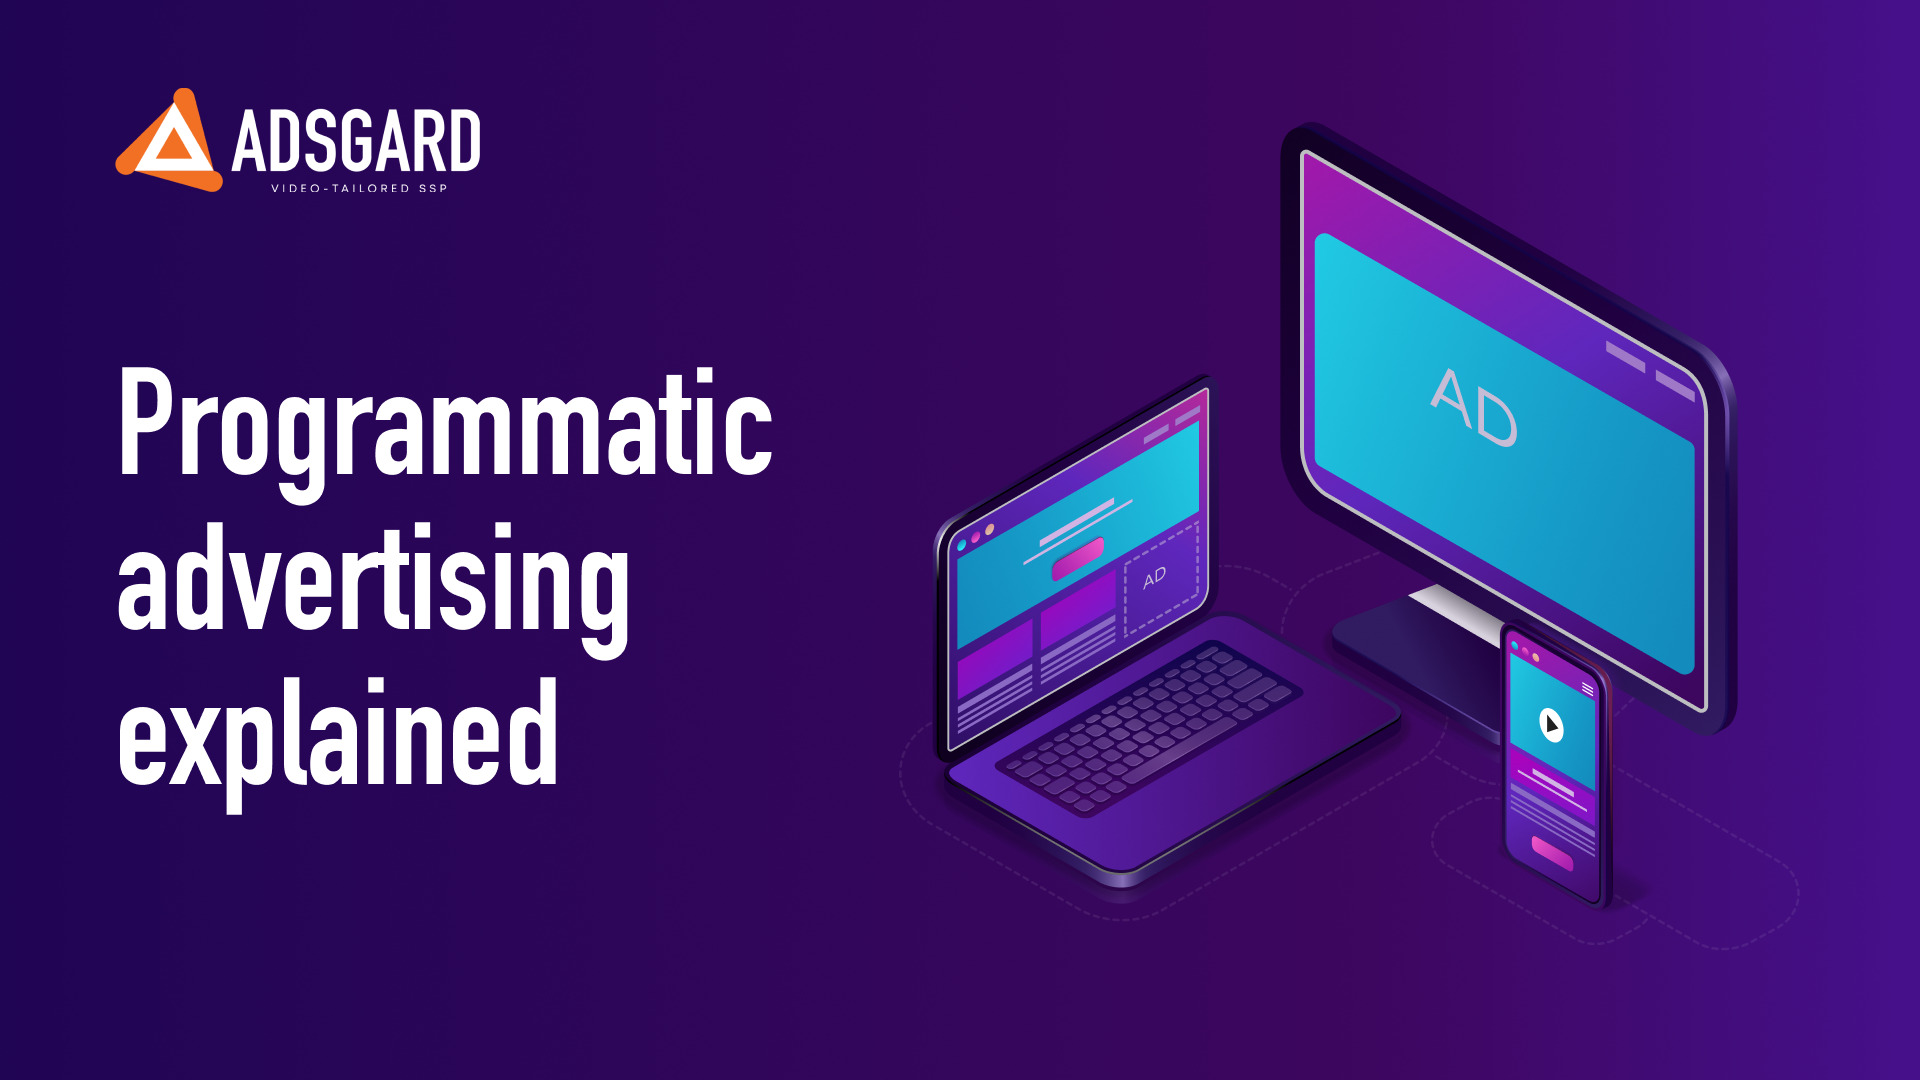 Programmatic advertising explained: what is it, how it works, and why it is efficient